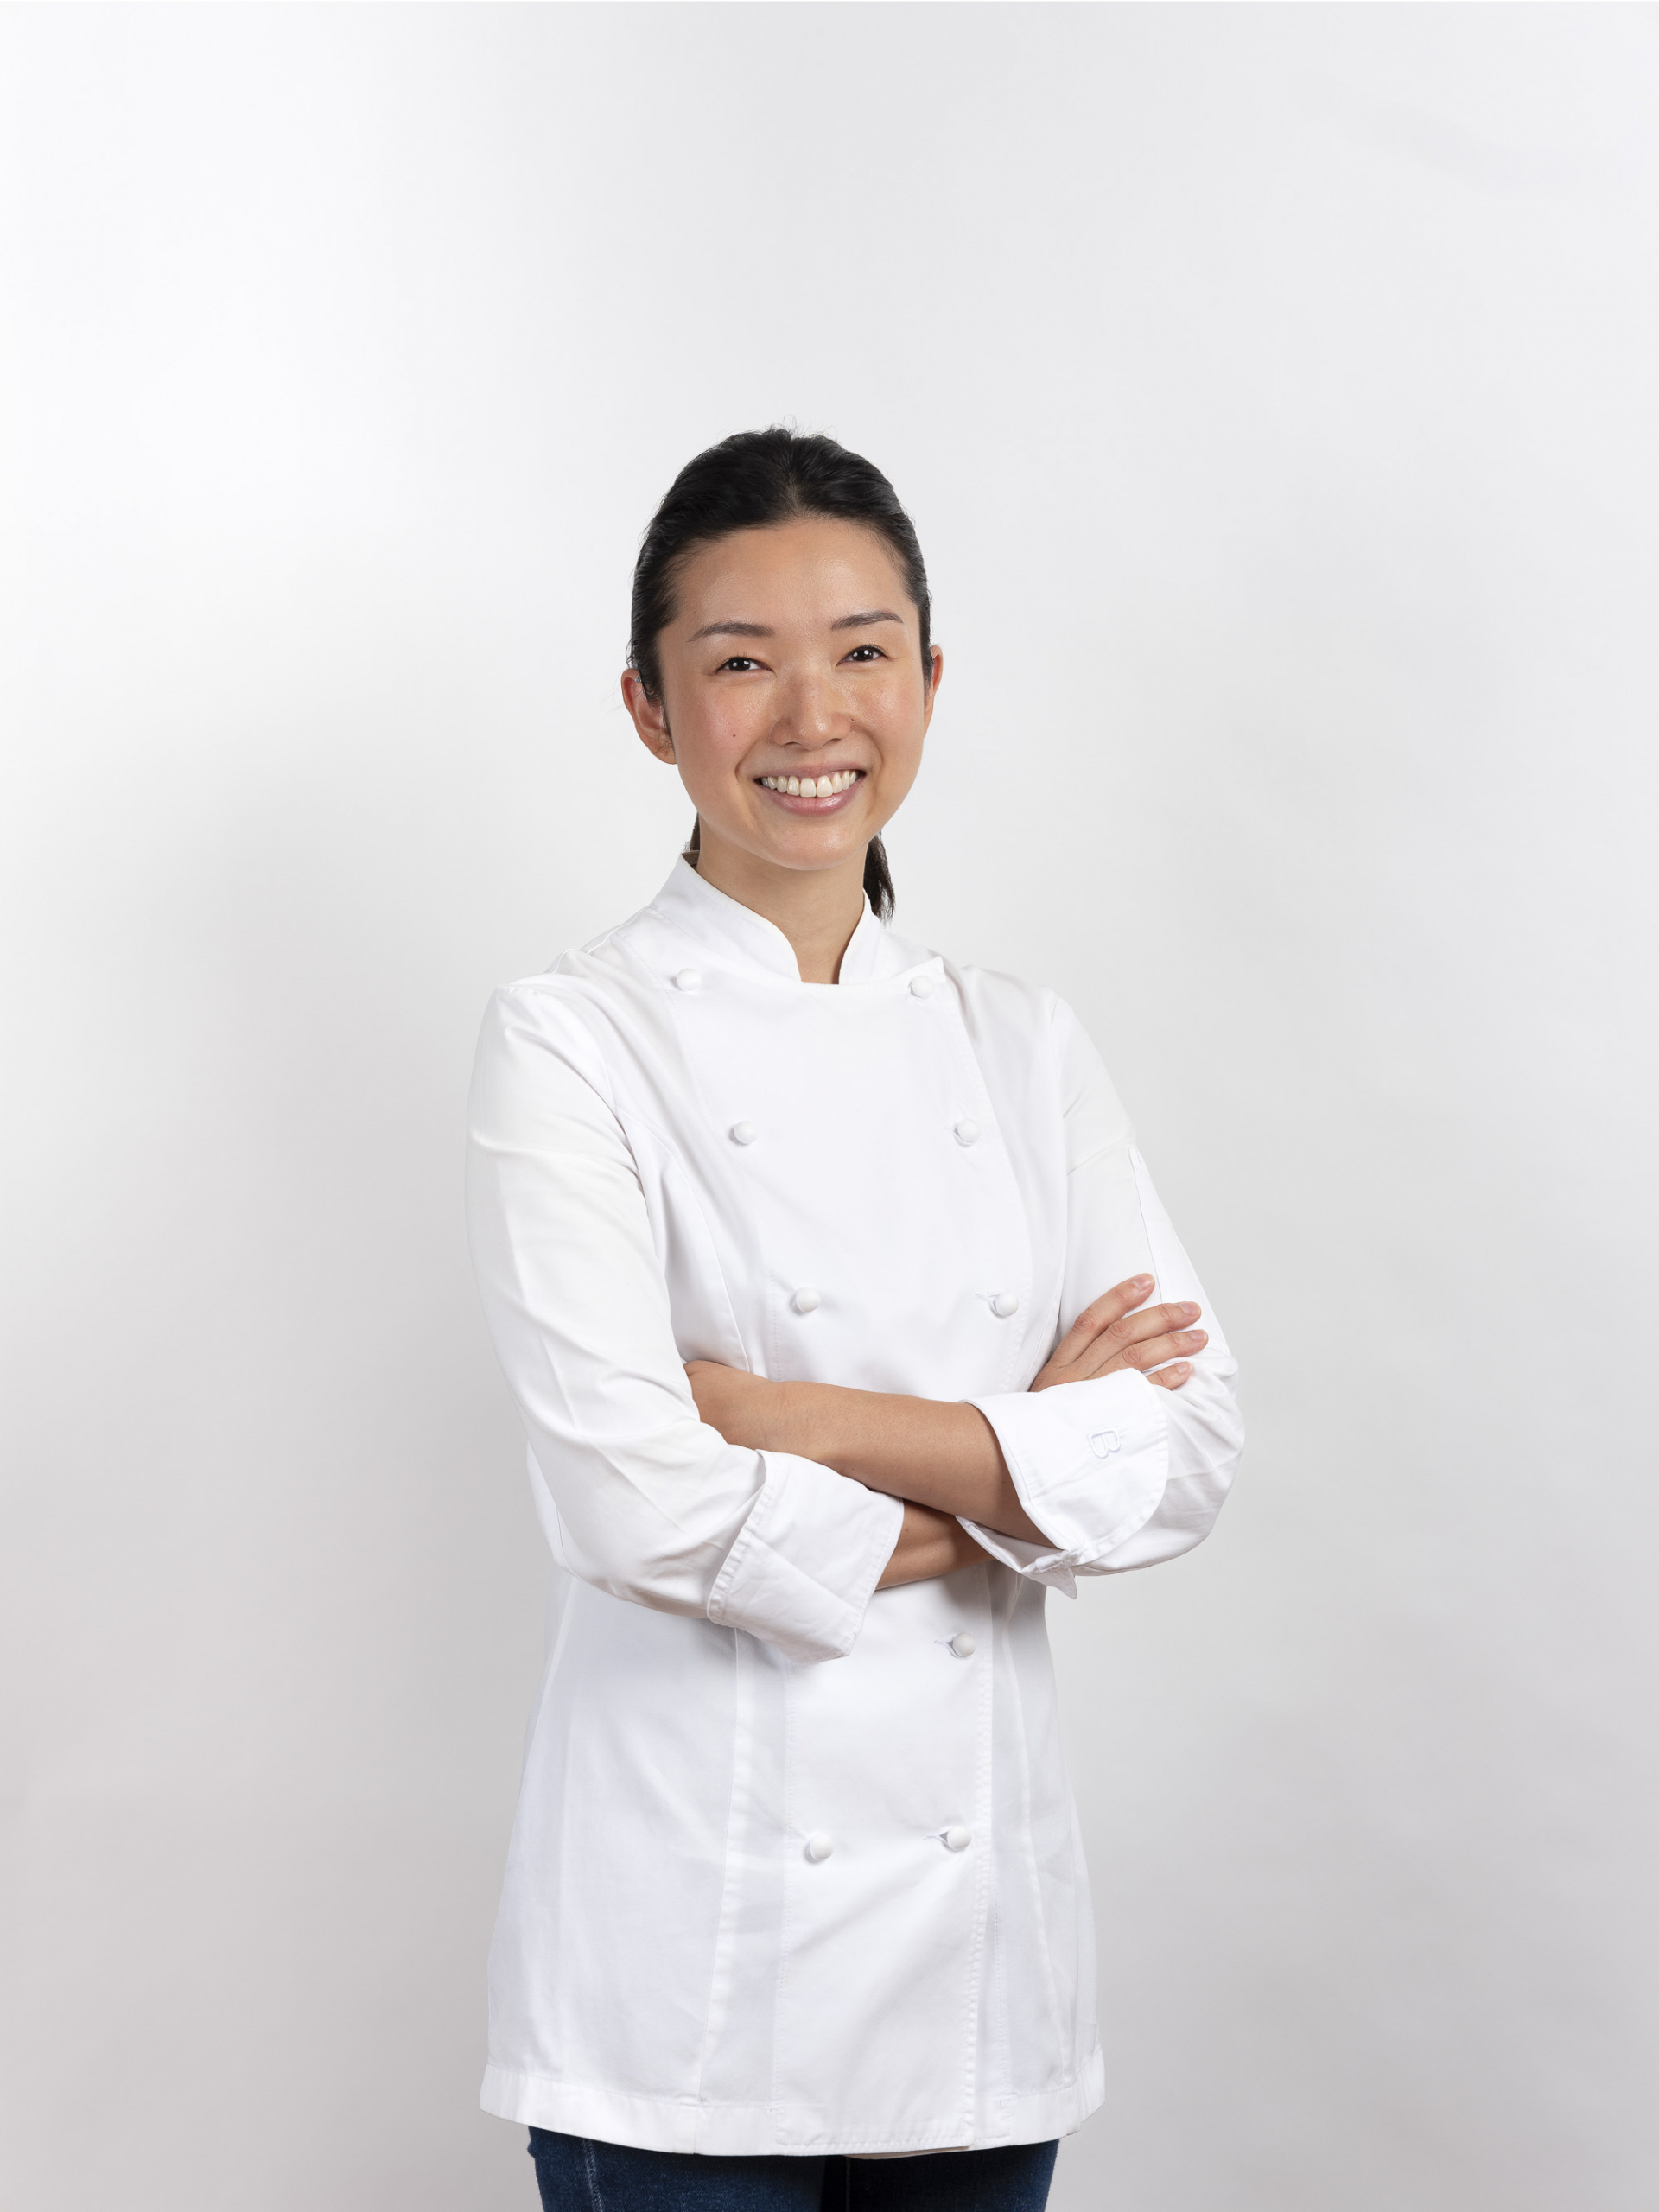 Food photography services photographer singapore chef sae takagi professional pastry culinary